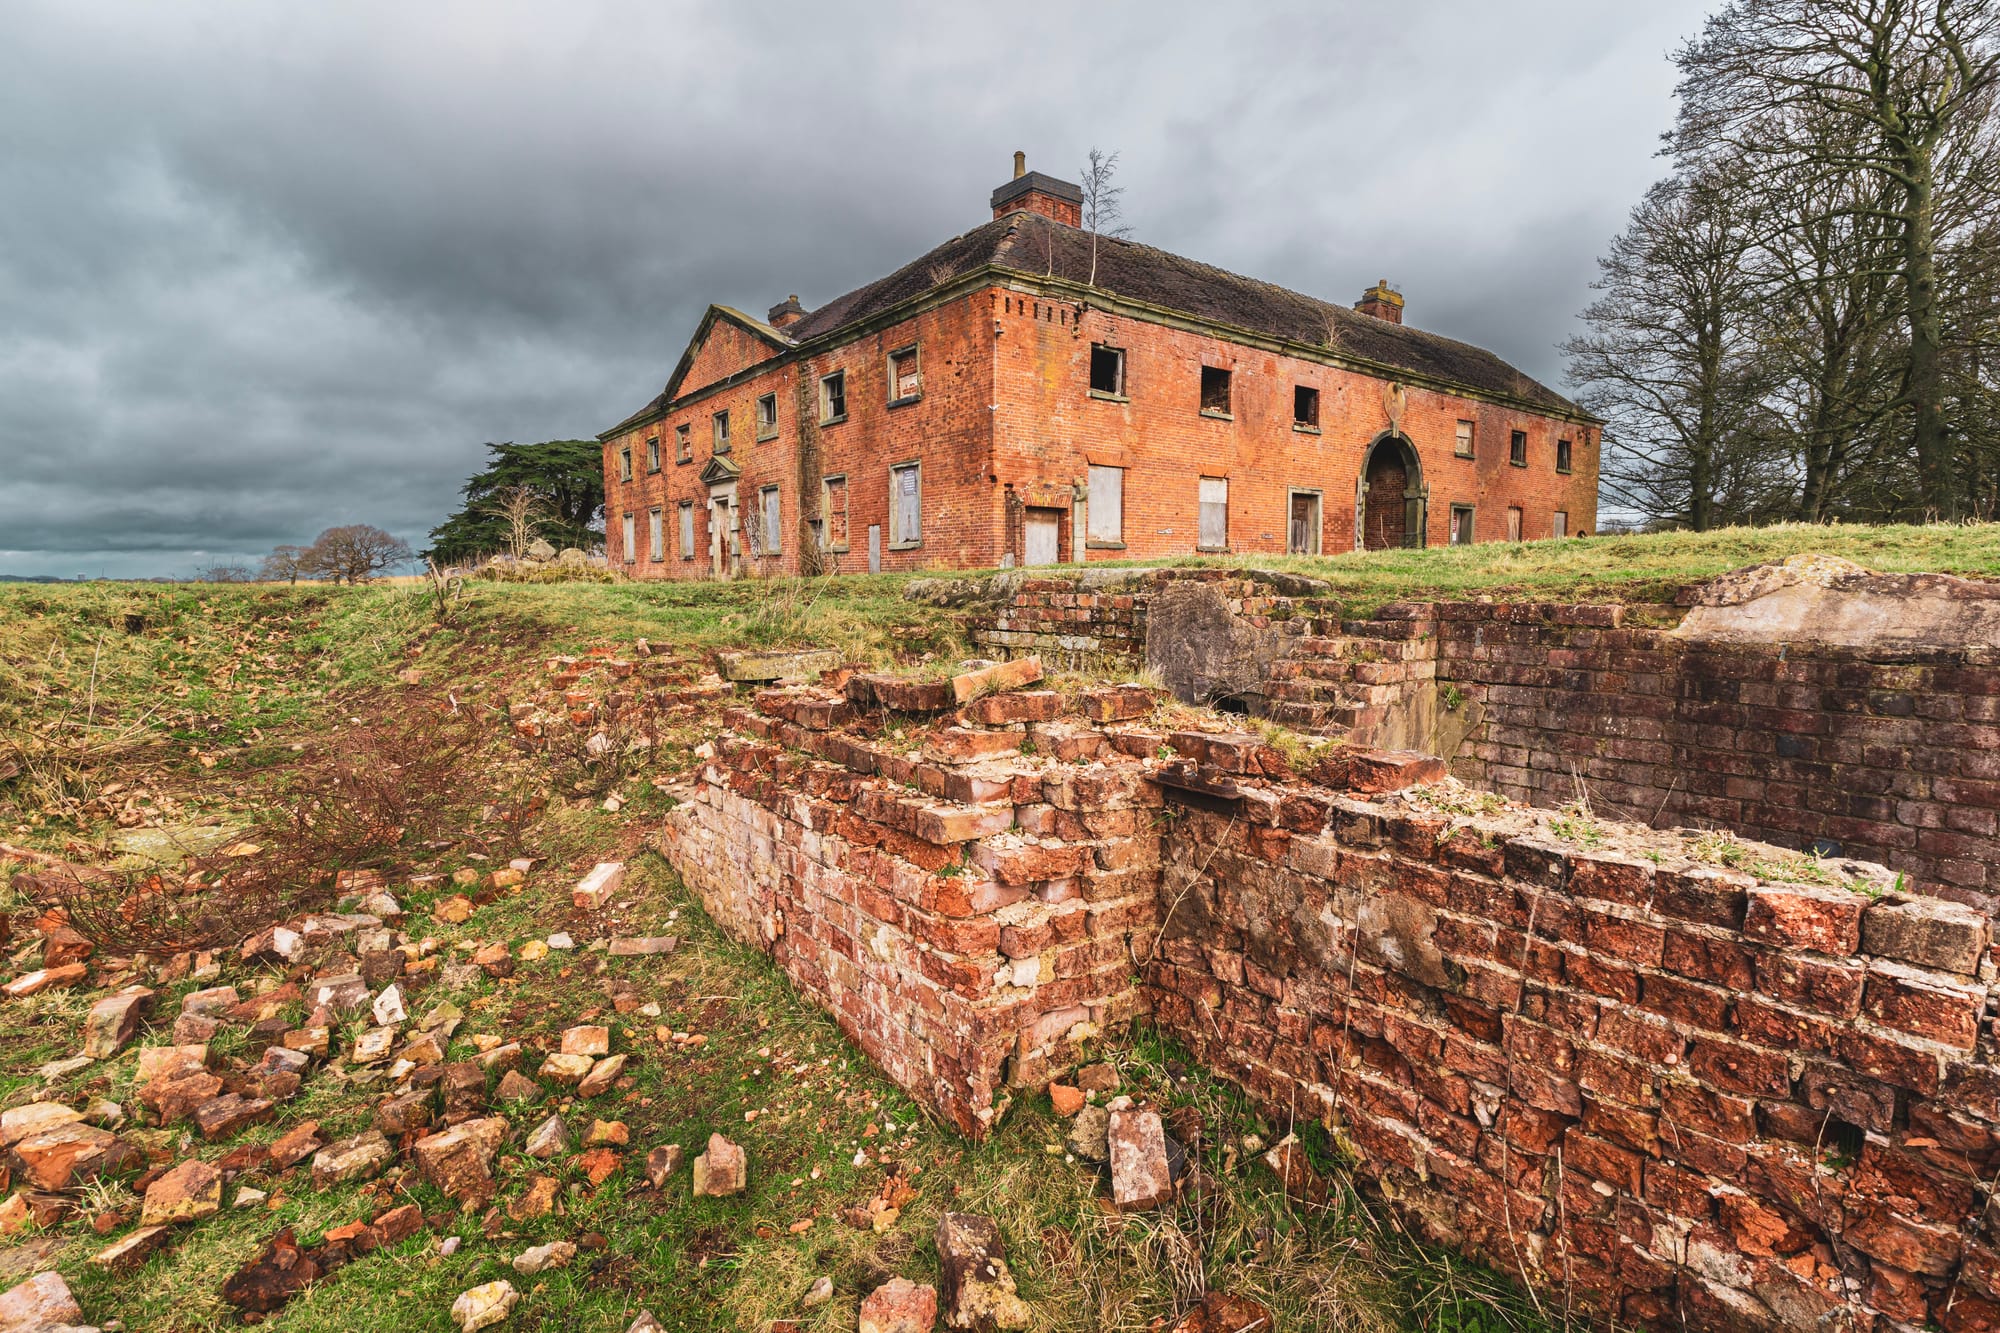 Staffordshire's Lost Estate: The Ruins of Teddesley Hall